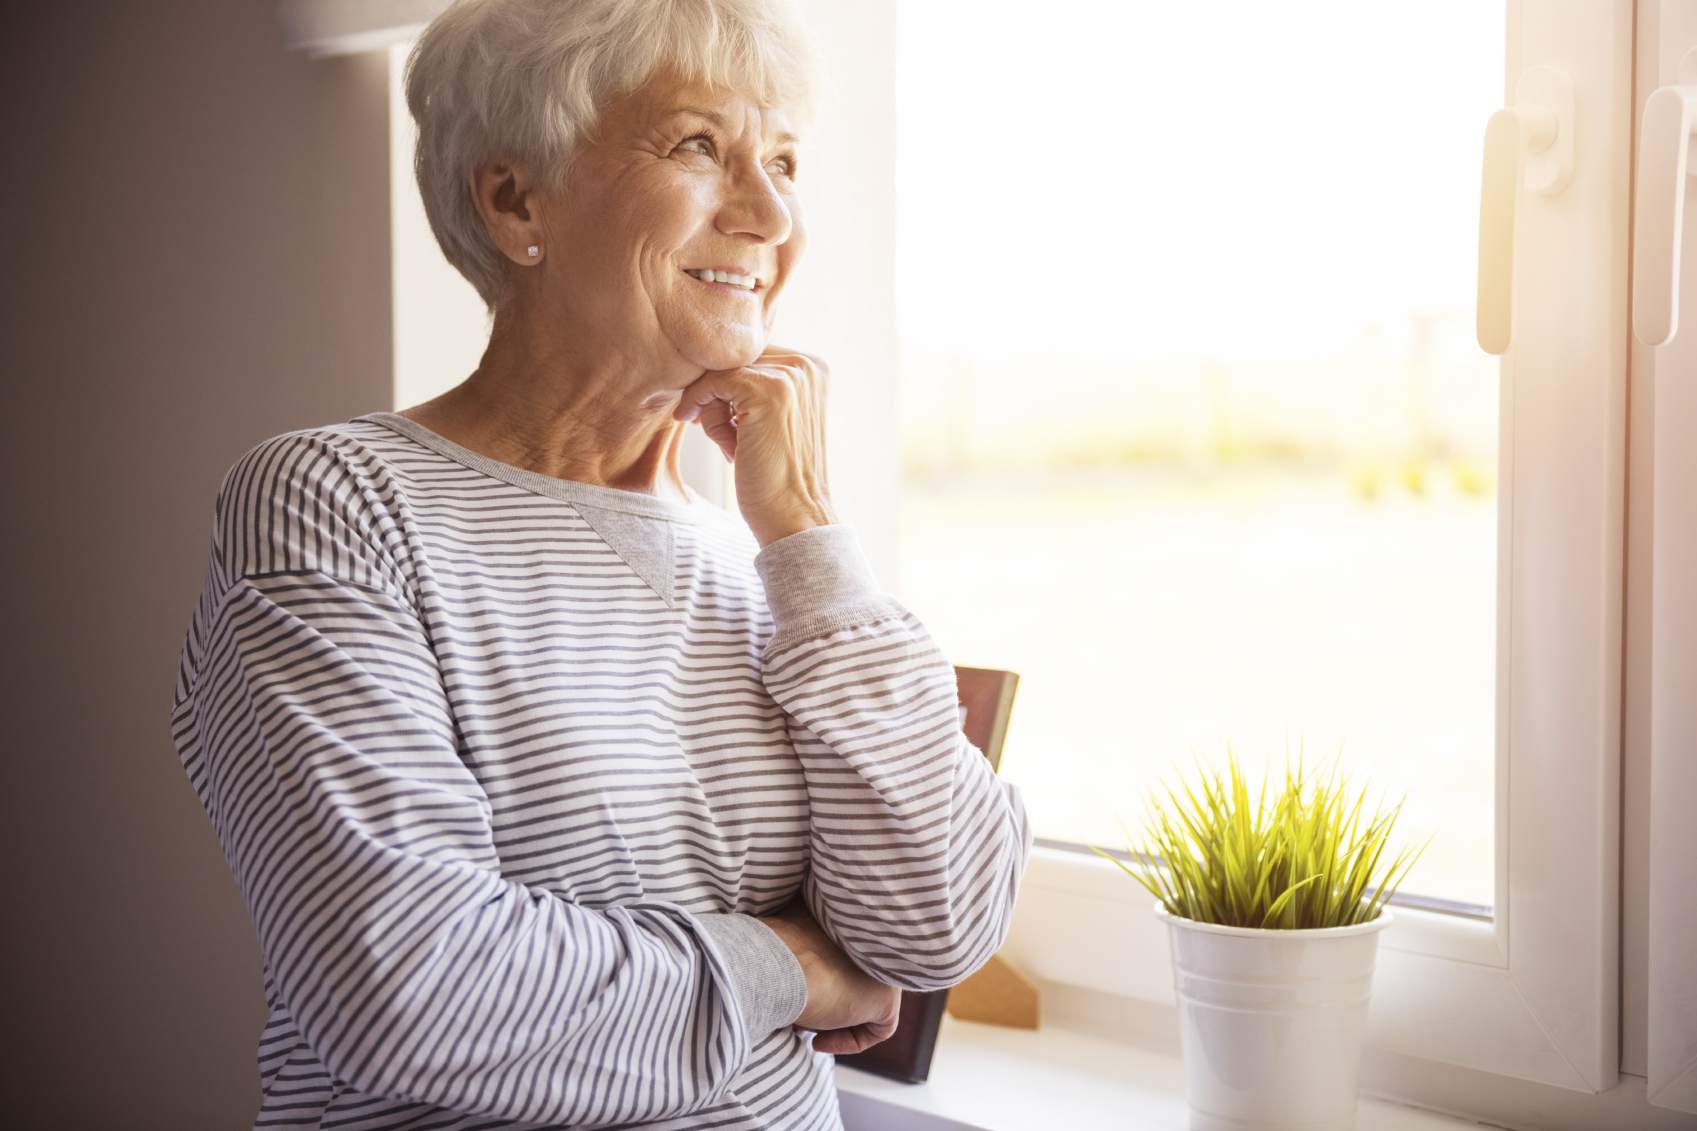 7 Tips to Help Choose the Right Financial Caregiver